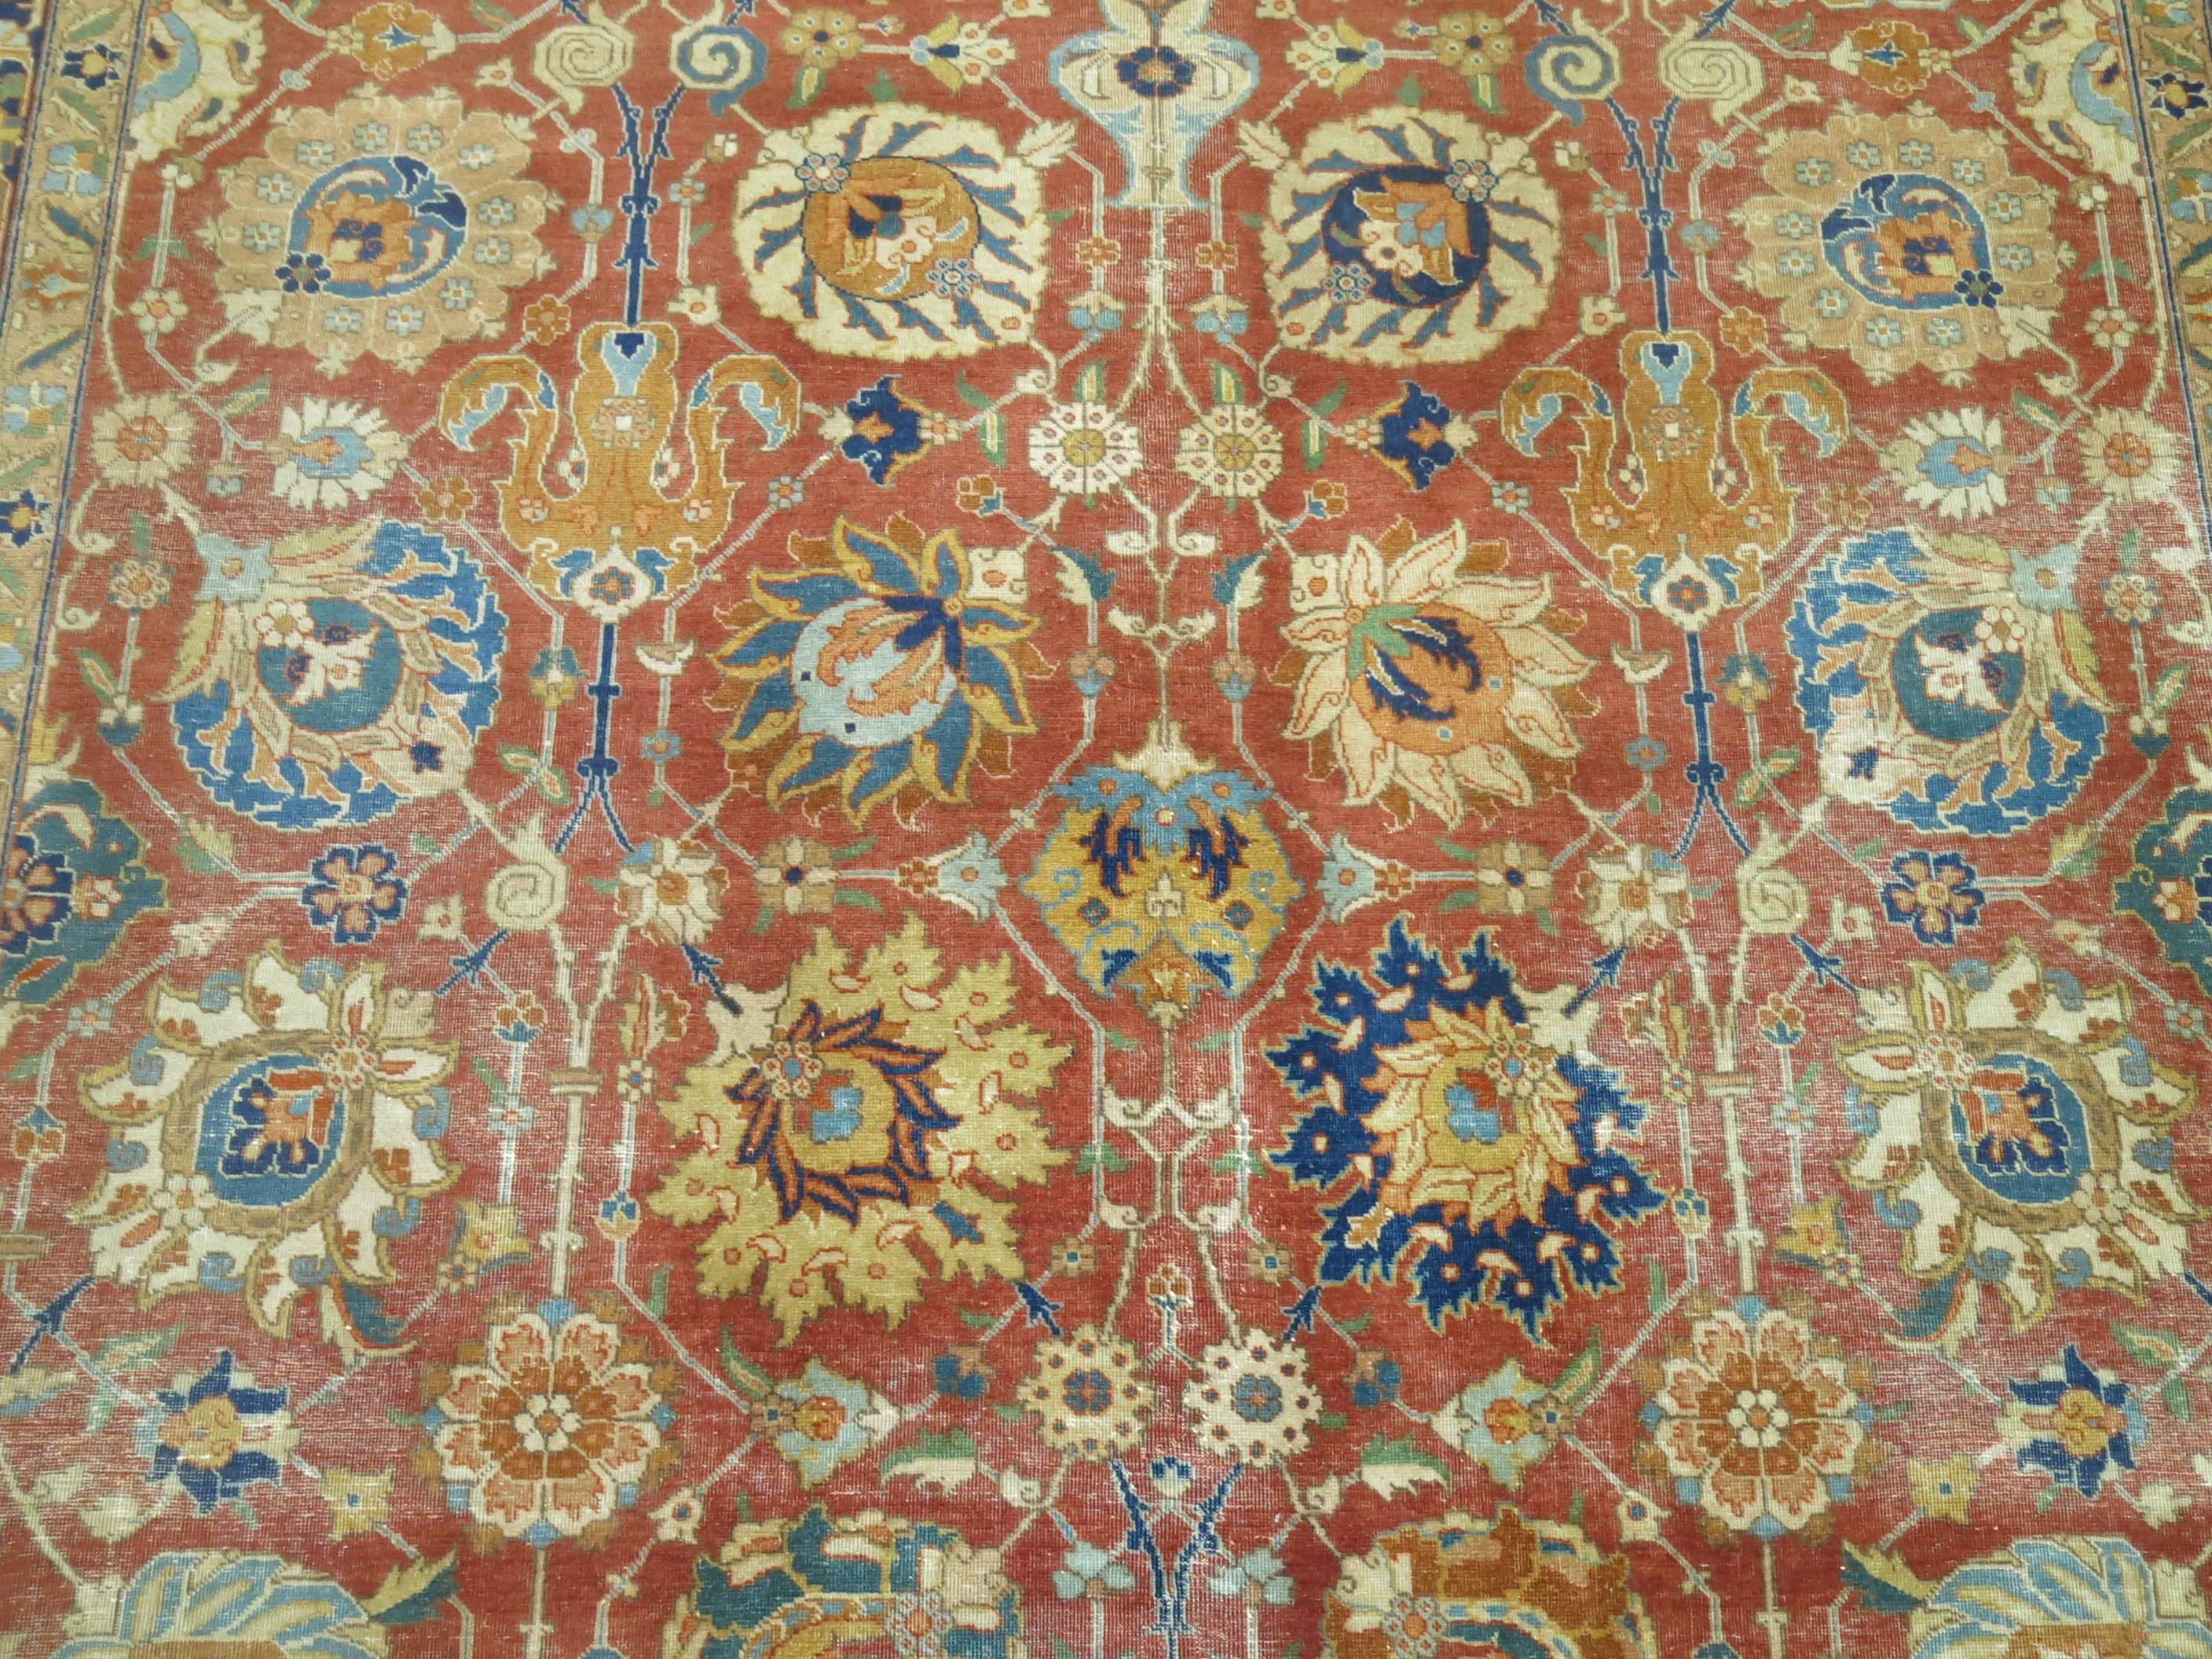 American Classical Antique Persian Tabriz Room Size Rug